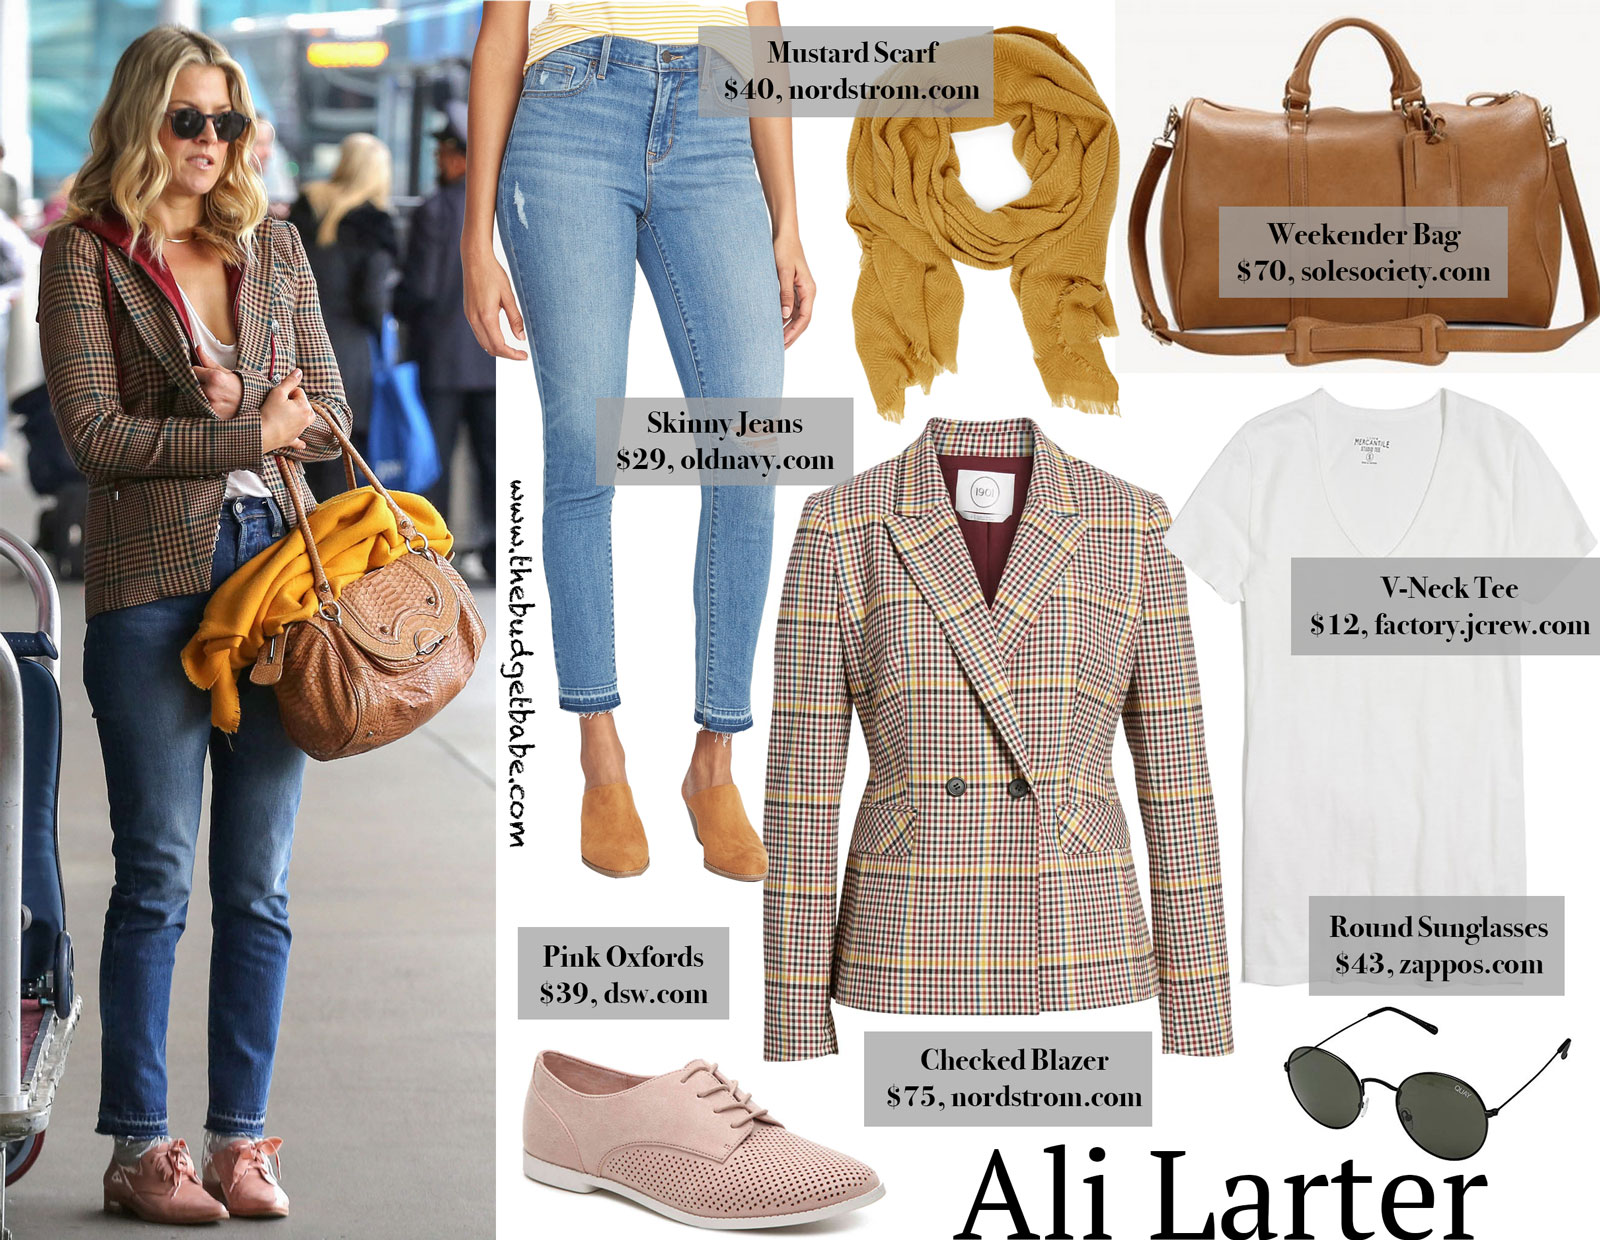 Ali Larter Checked Blazer and Oxford Shoes Look for Less